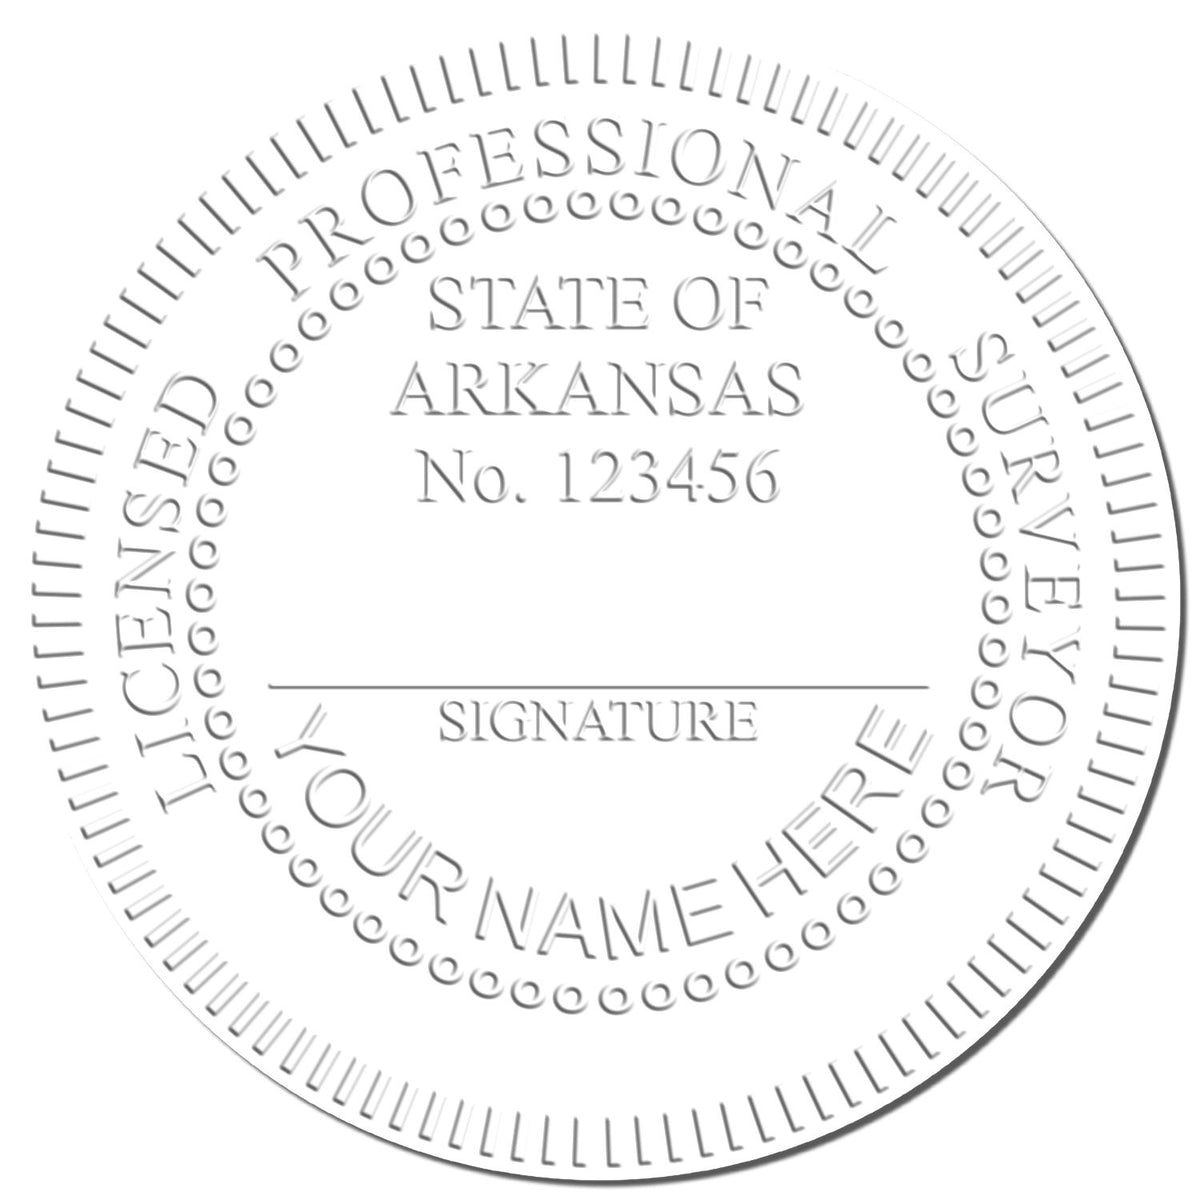 This paper is stamped with a sample imprint of the Heavy Duty Cast Iron Arkansas Land Surveyor Seal Embosser, signifying its quality and reliability.